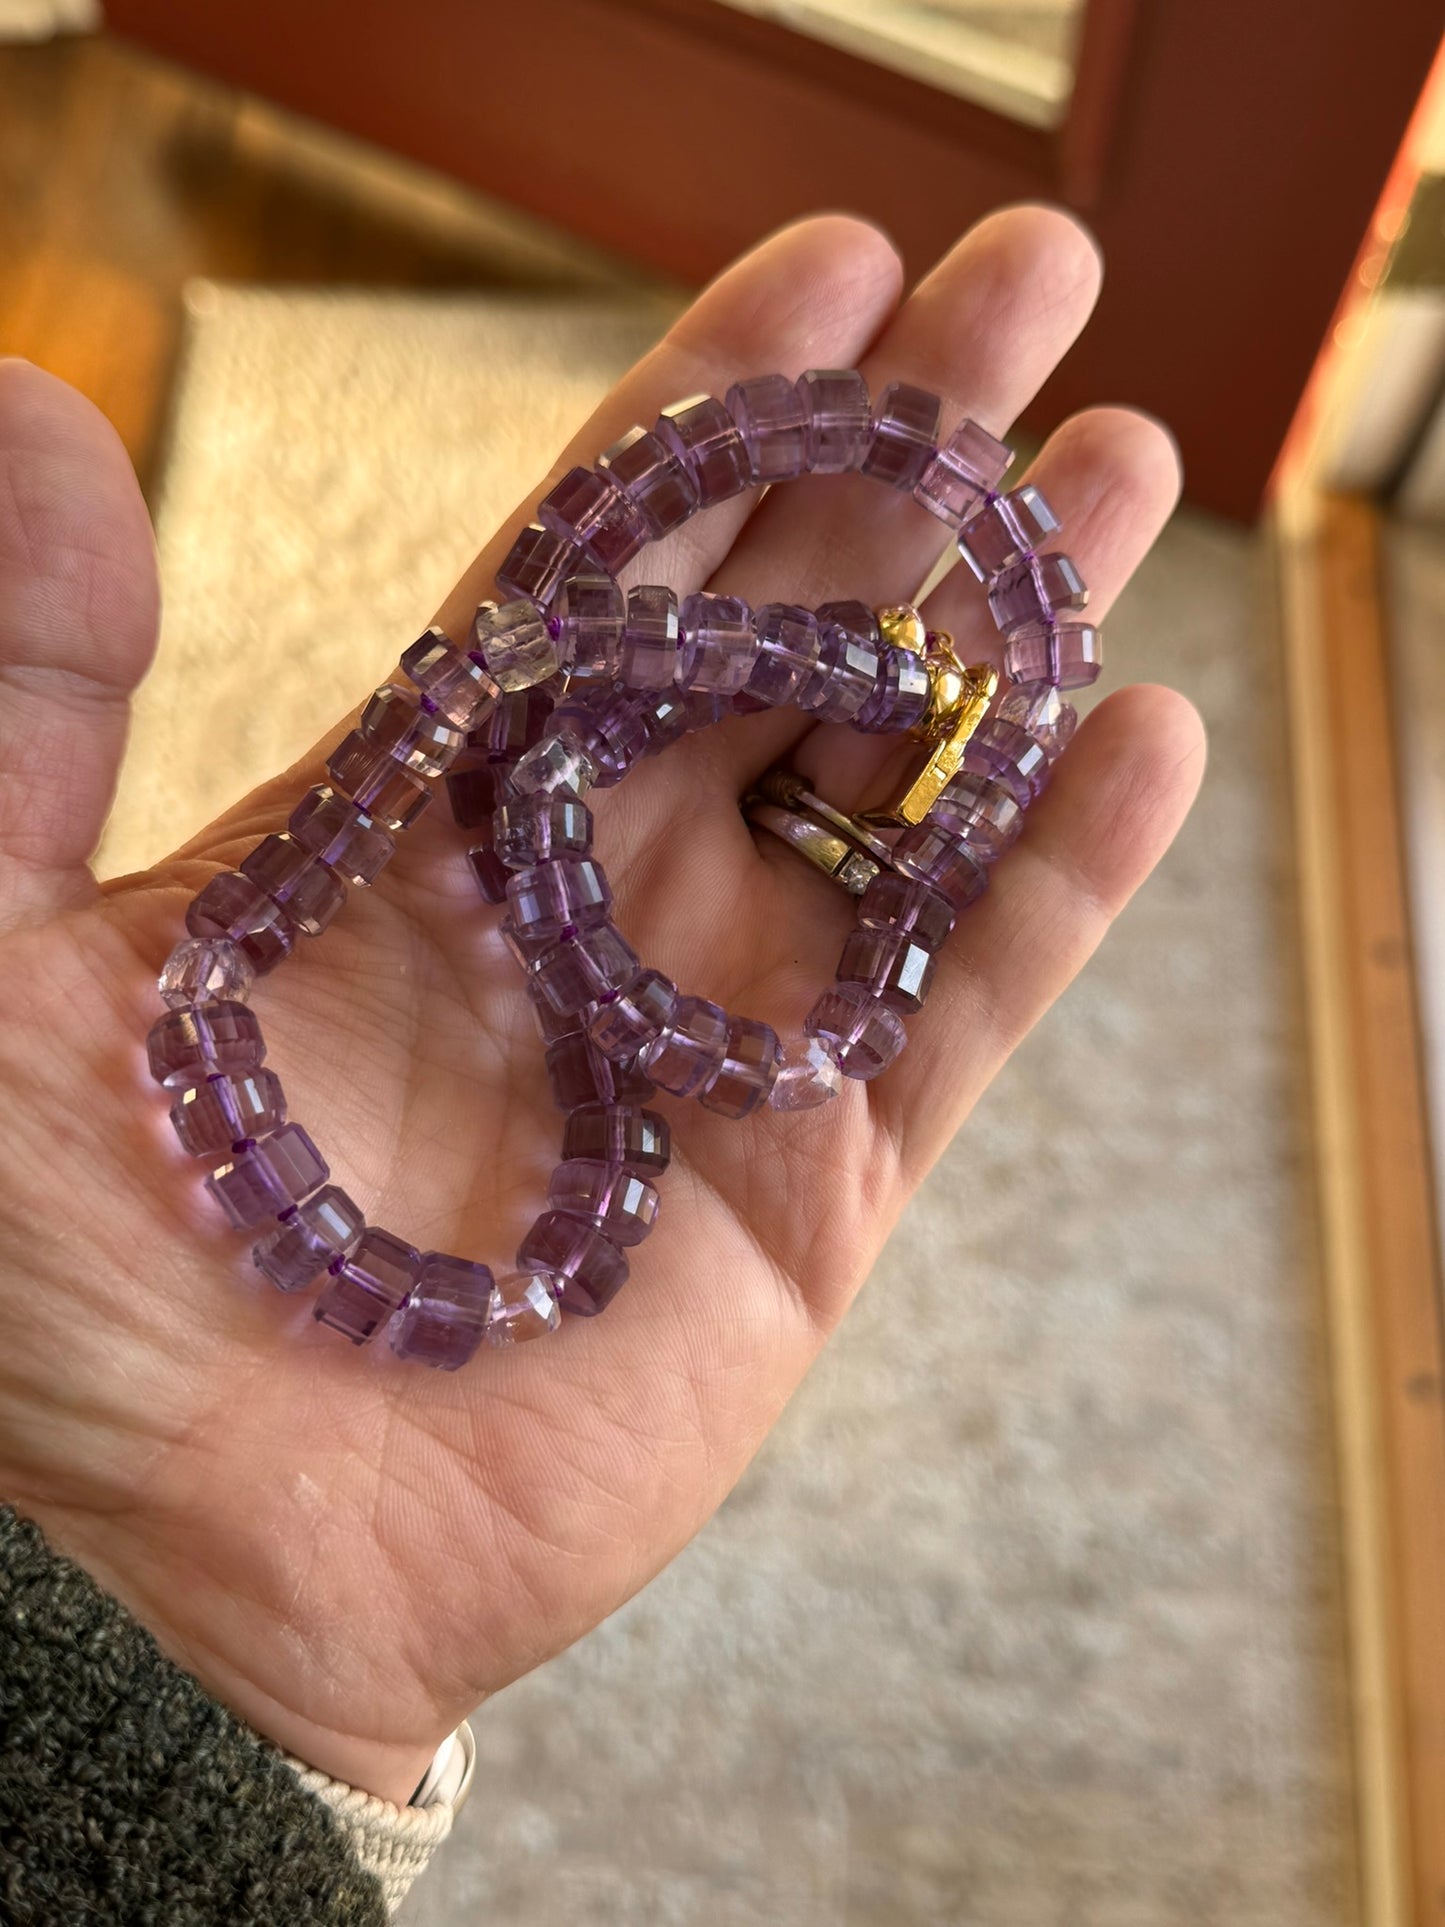 Amethyst hand-knotted necklace